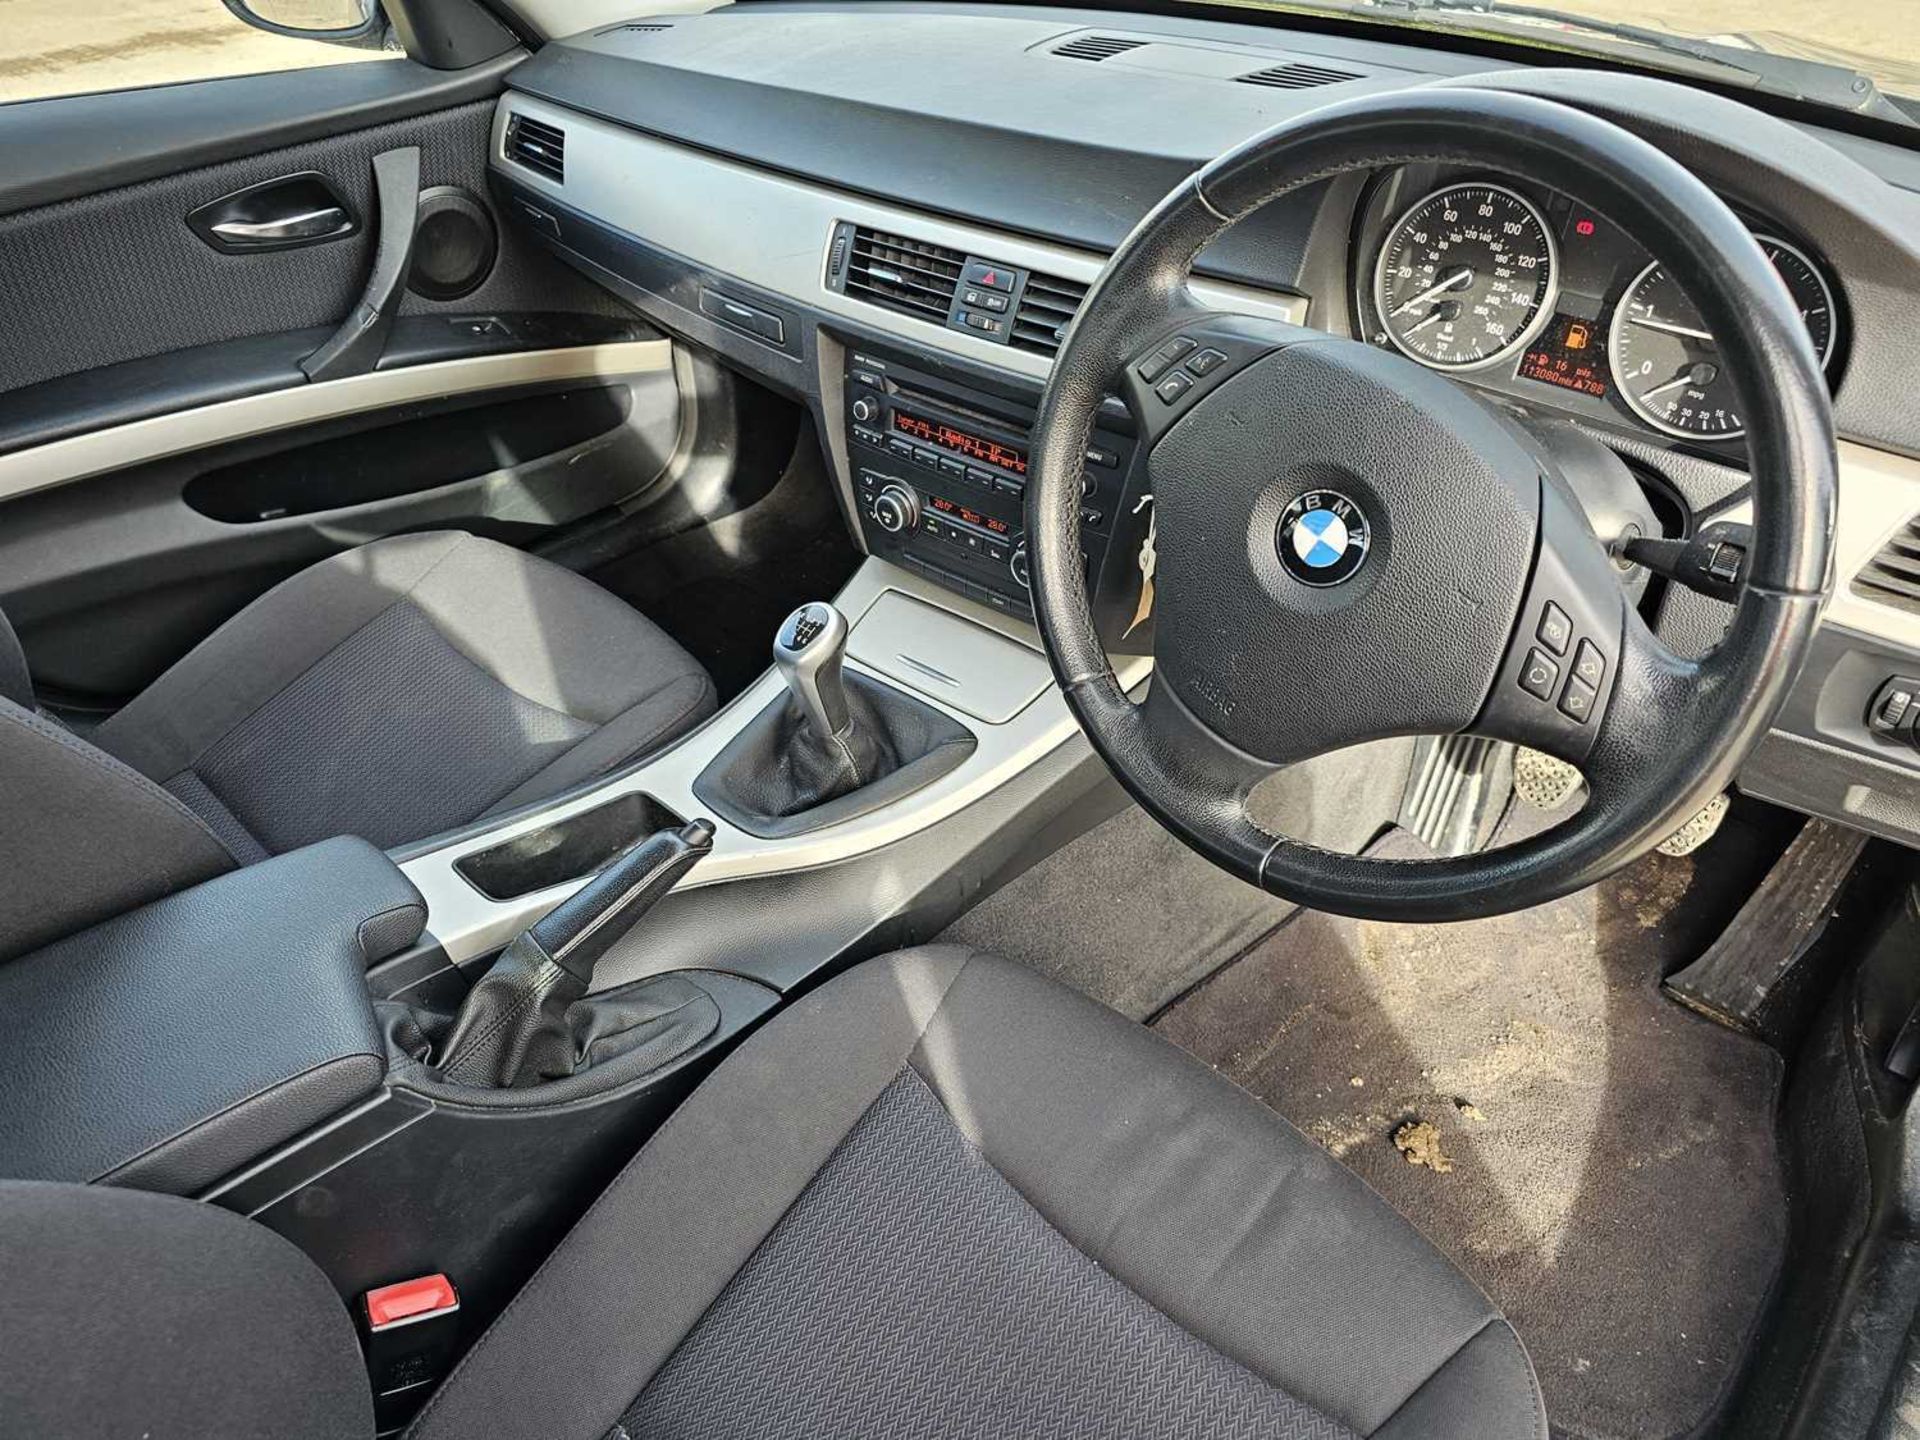 2011 BMW 320D, 6 Speed, Parking Sensors, Bluetooth, A/C (NO VAT)(Reg. Docs. Available, Tested 01/25) - Image 22 of 28